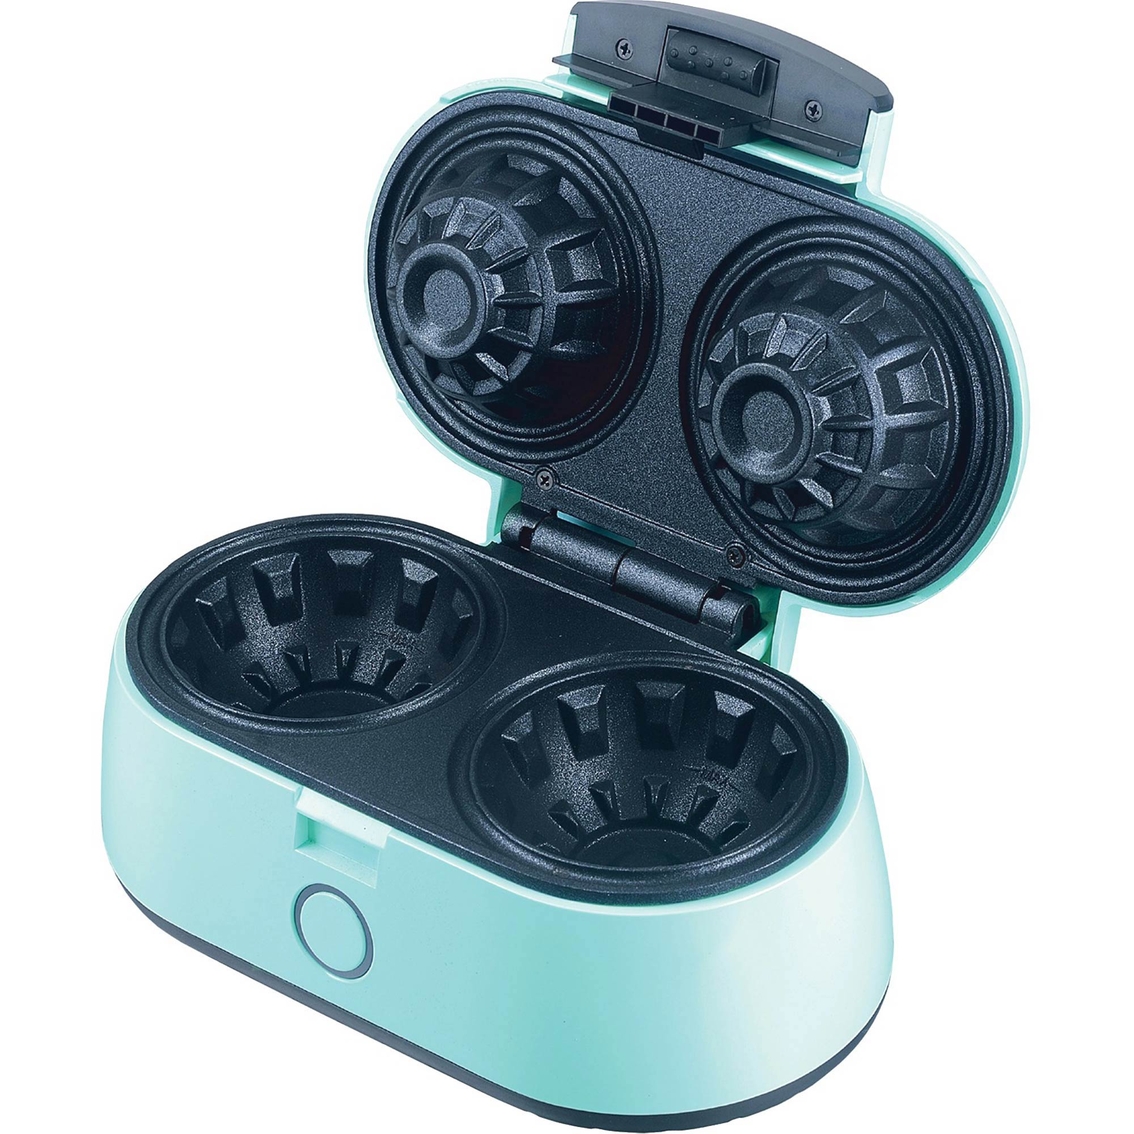 Brentwood Double Waffle Bowl Maker - Image 2 of 5